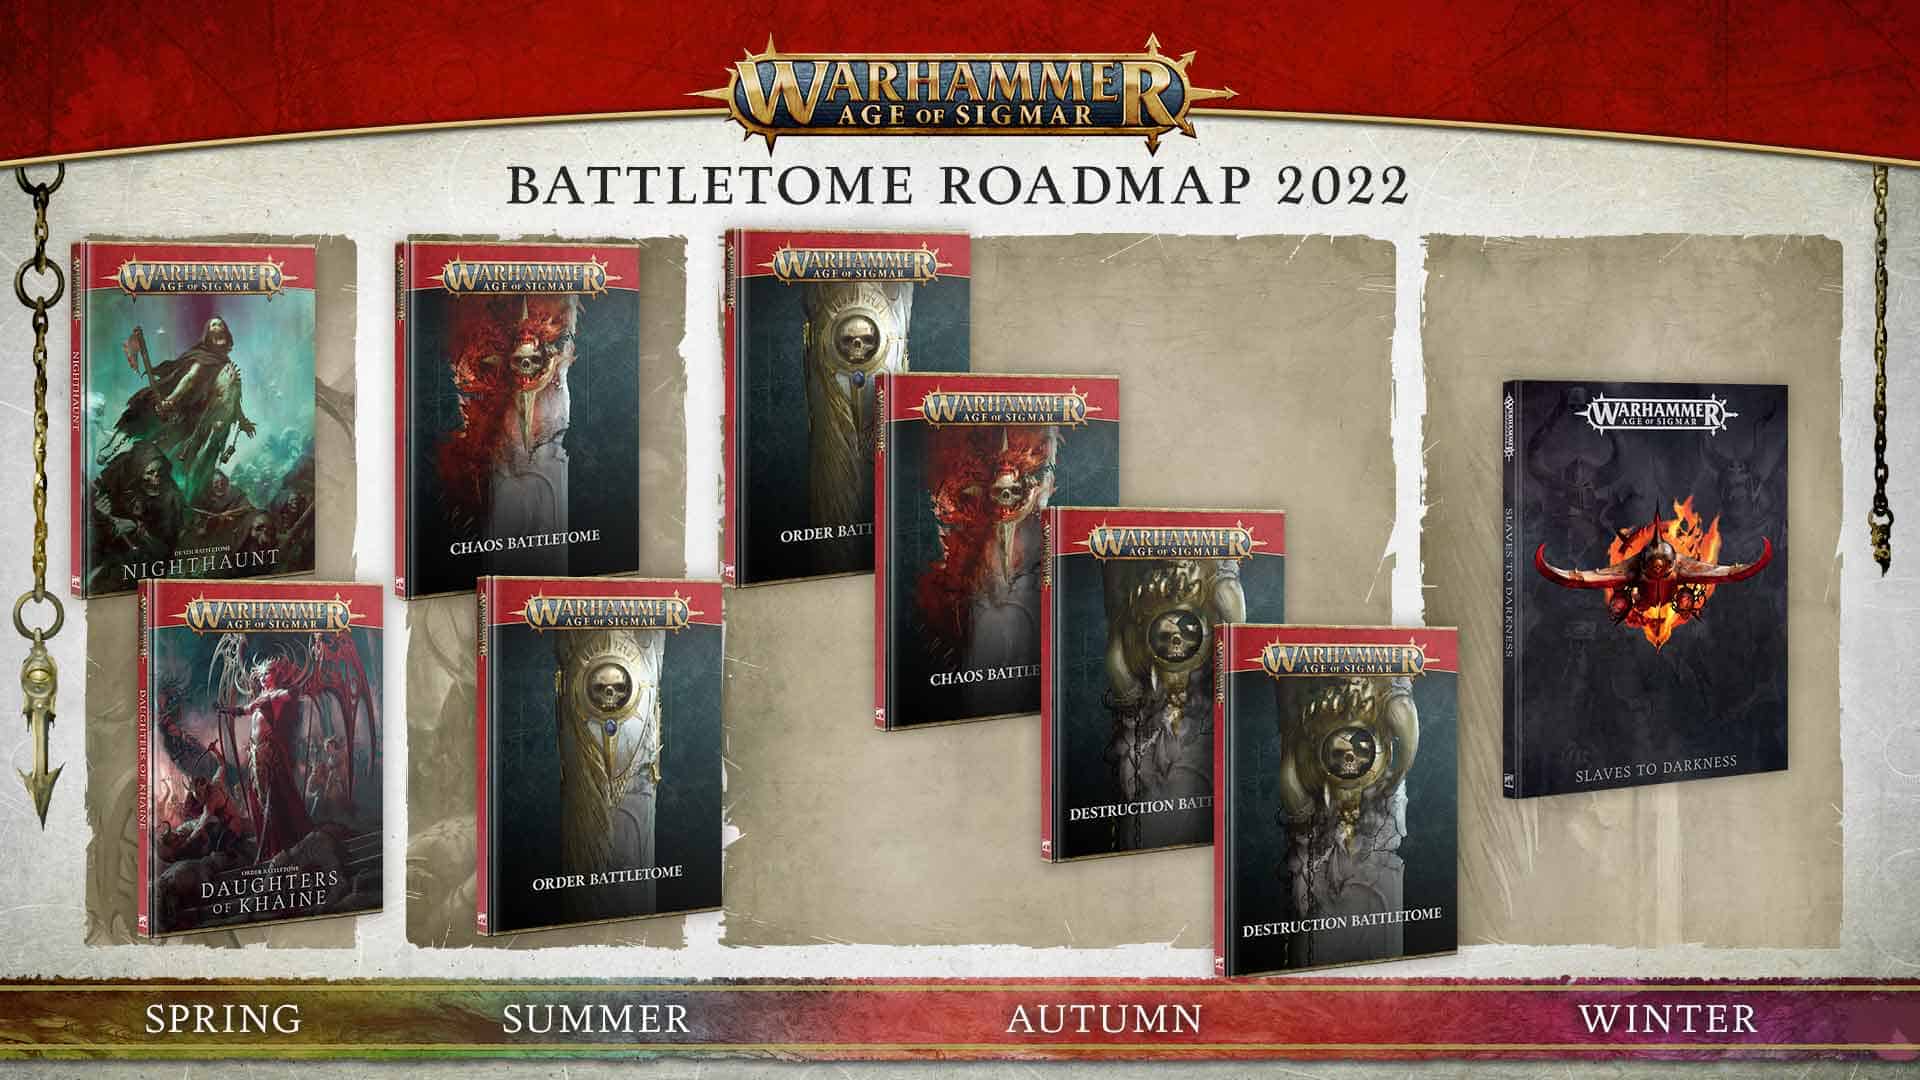 Age of Sigmar 2022 Roadmap for releases and battletomes